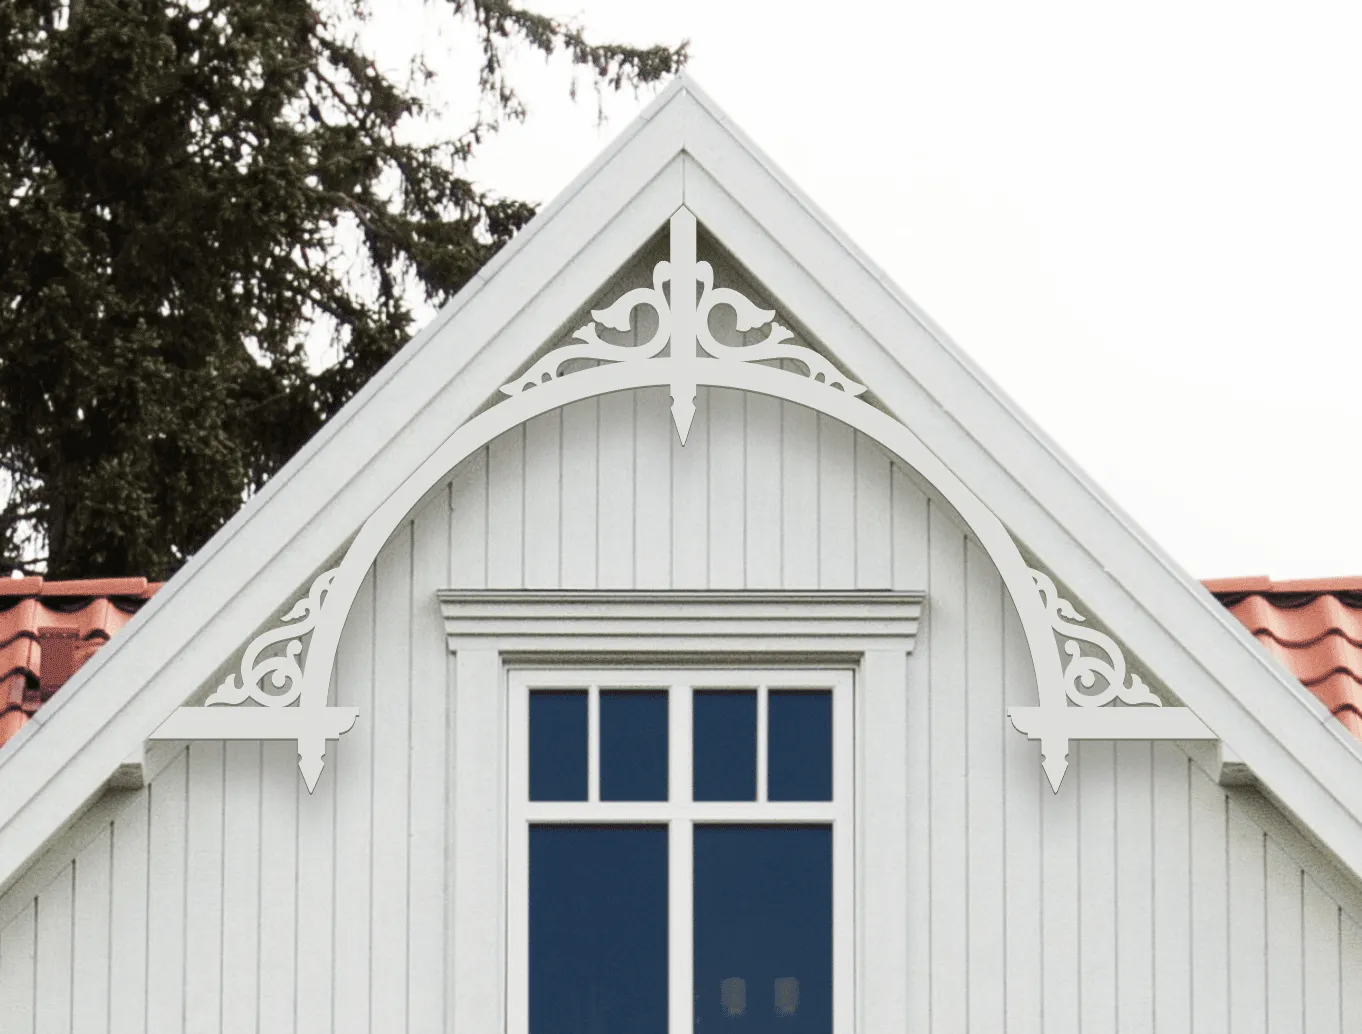 Gable pediment 050 - A white house with decorative wooden victorian millwork as house decoration for roof and gable end. The top frame is mounted behind the eaves.